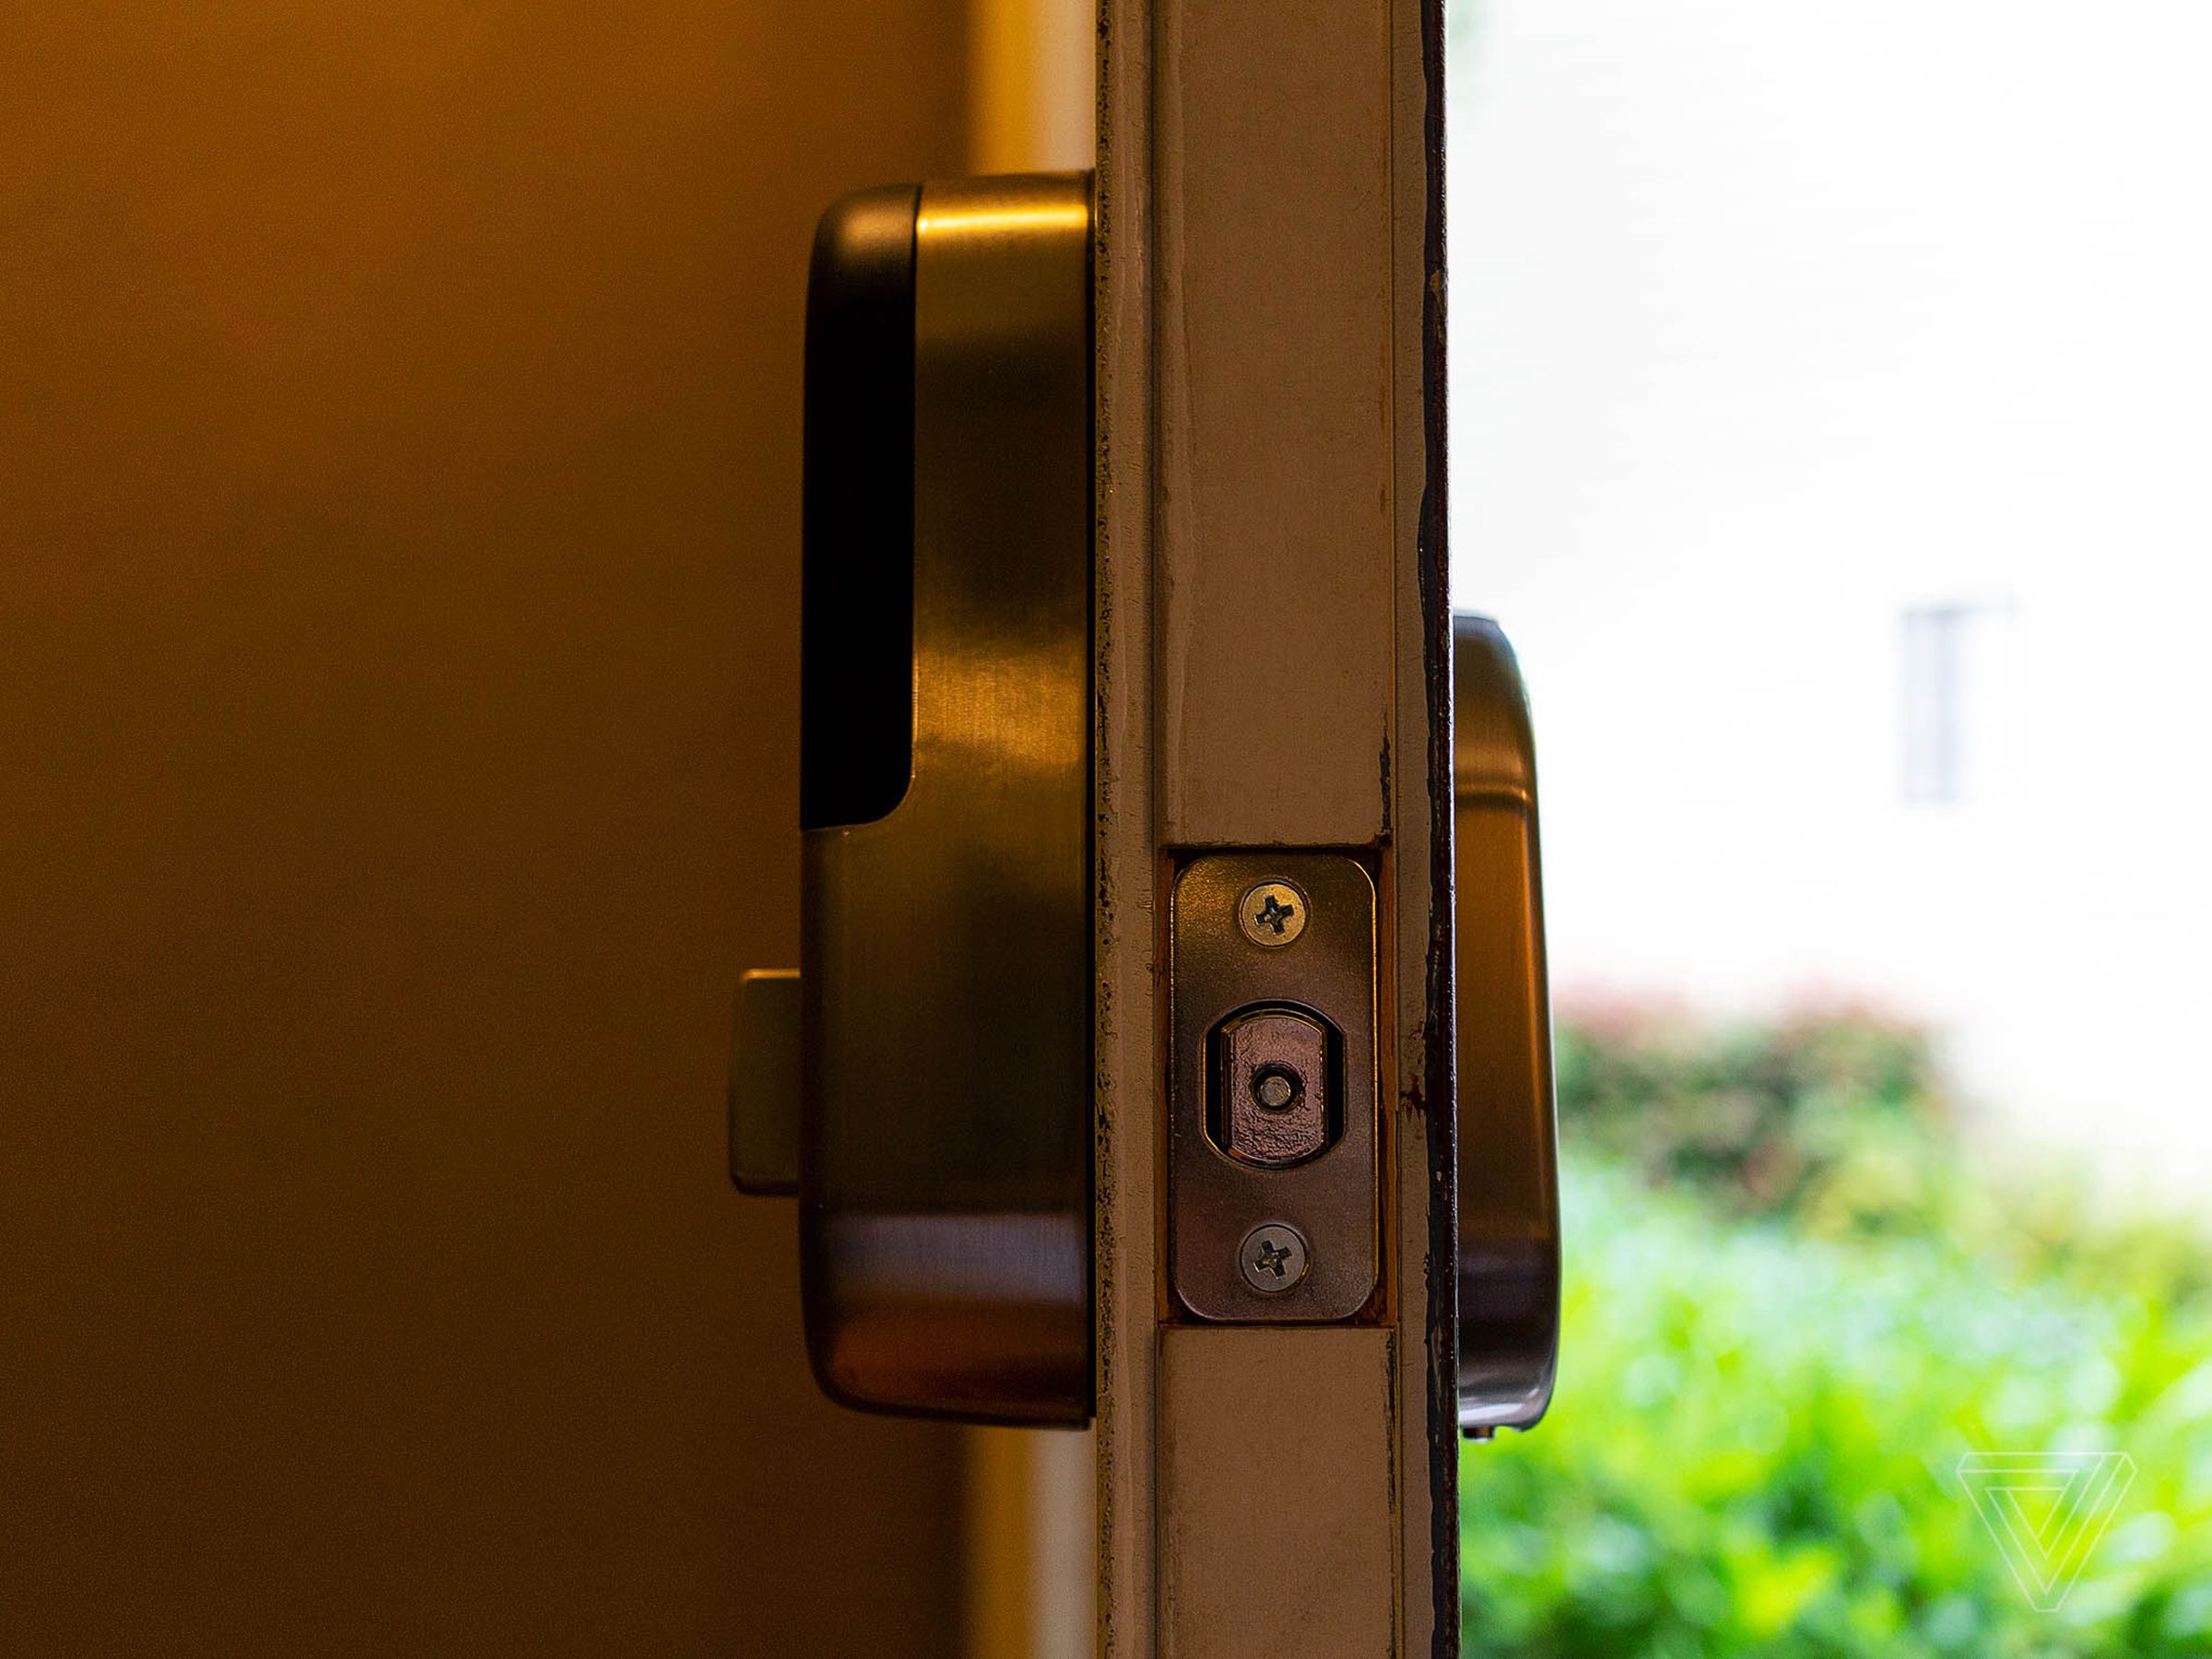 The Nest x Yale lock is a direct replacement for most standard deadbolts, with most of its components housed on the inside of the door. It does not have a manual key fallback, however.